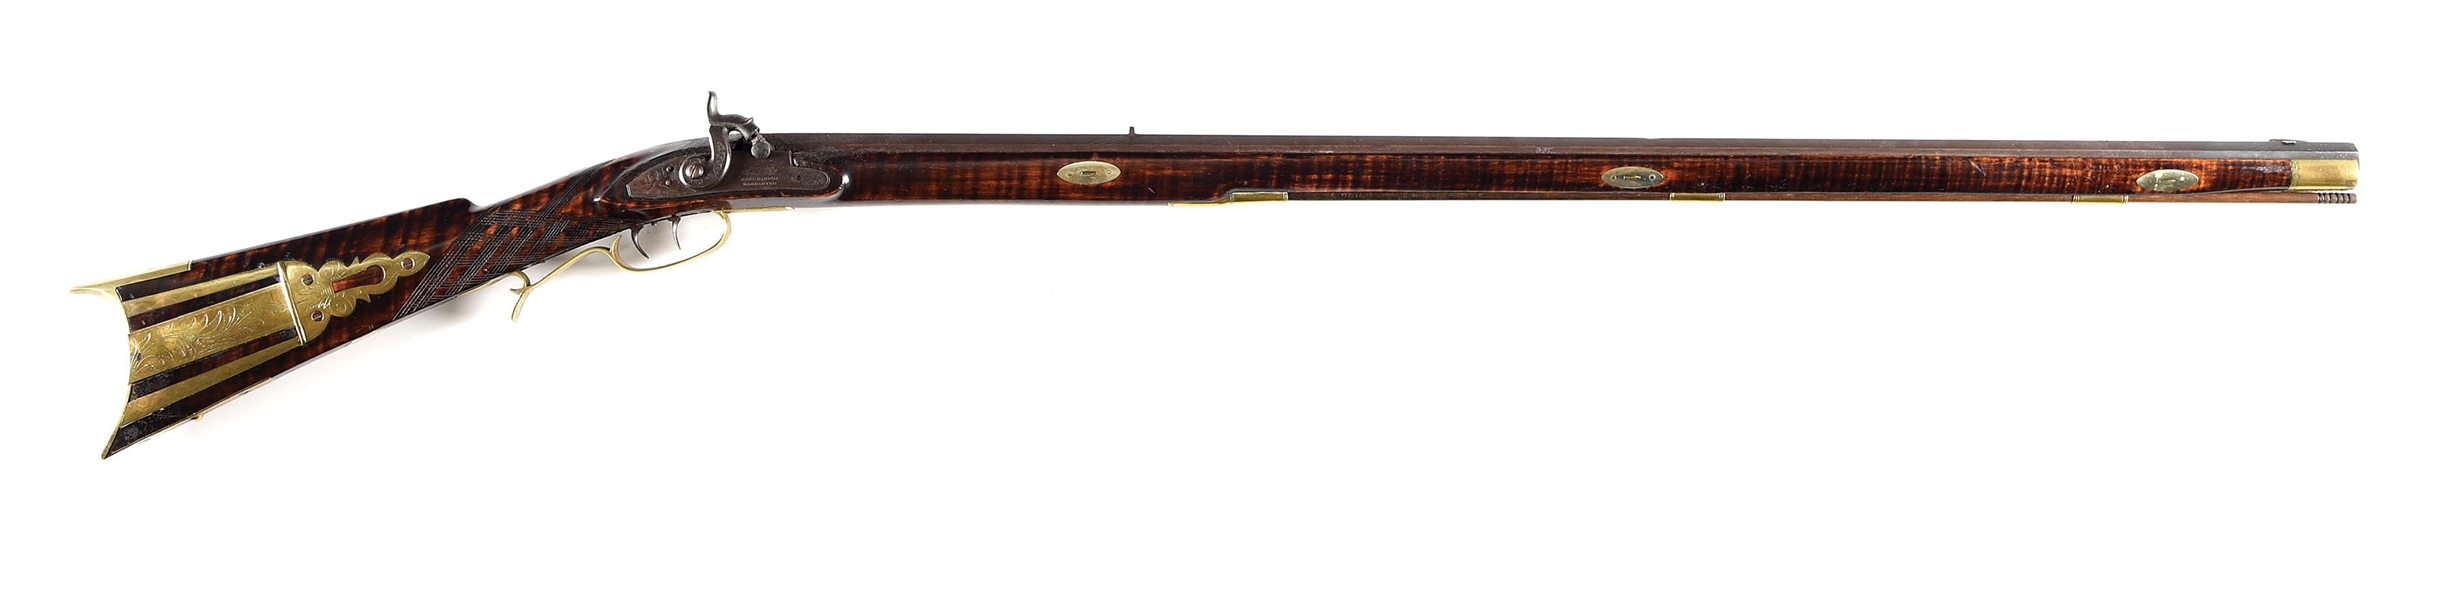 (A) JACOB FORDNEY SIGNED PERCUSSION KENTUCKY RIFLE.